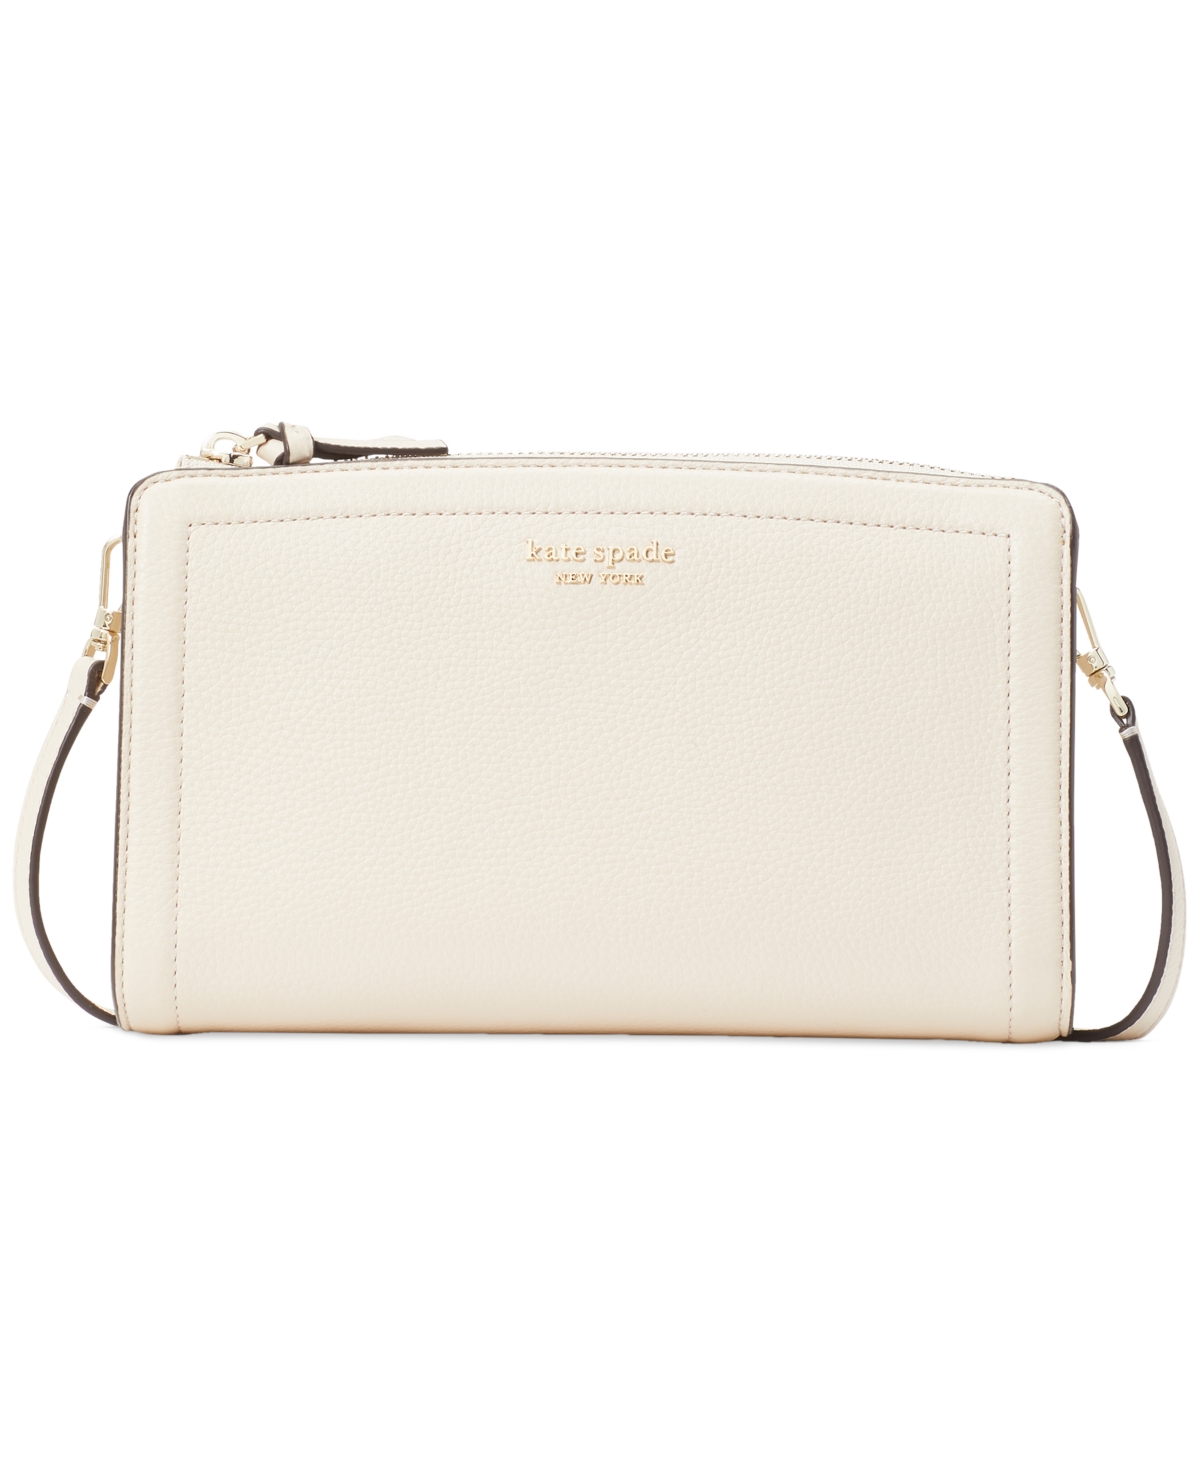 Kate Spade Knott Pebbled Leather Crossbody In Warm Taupe